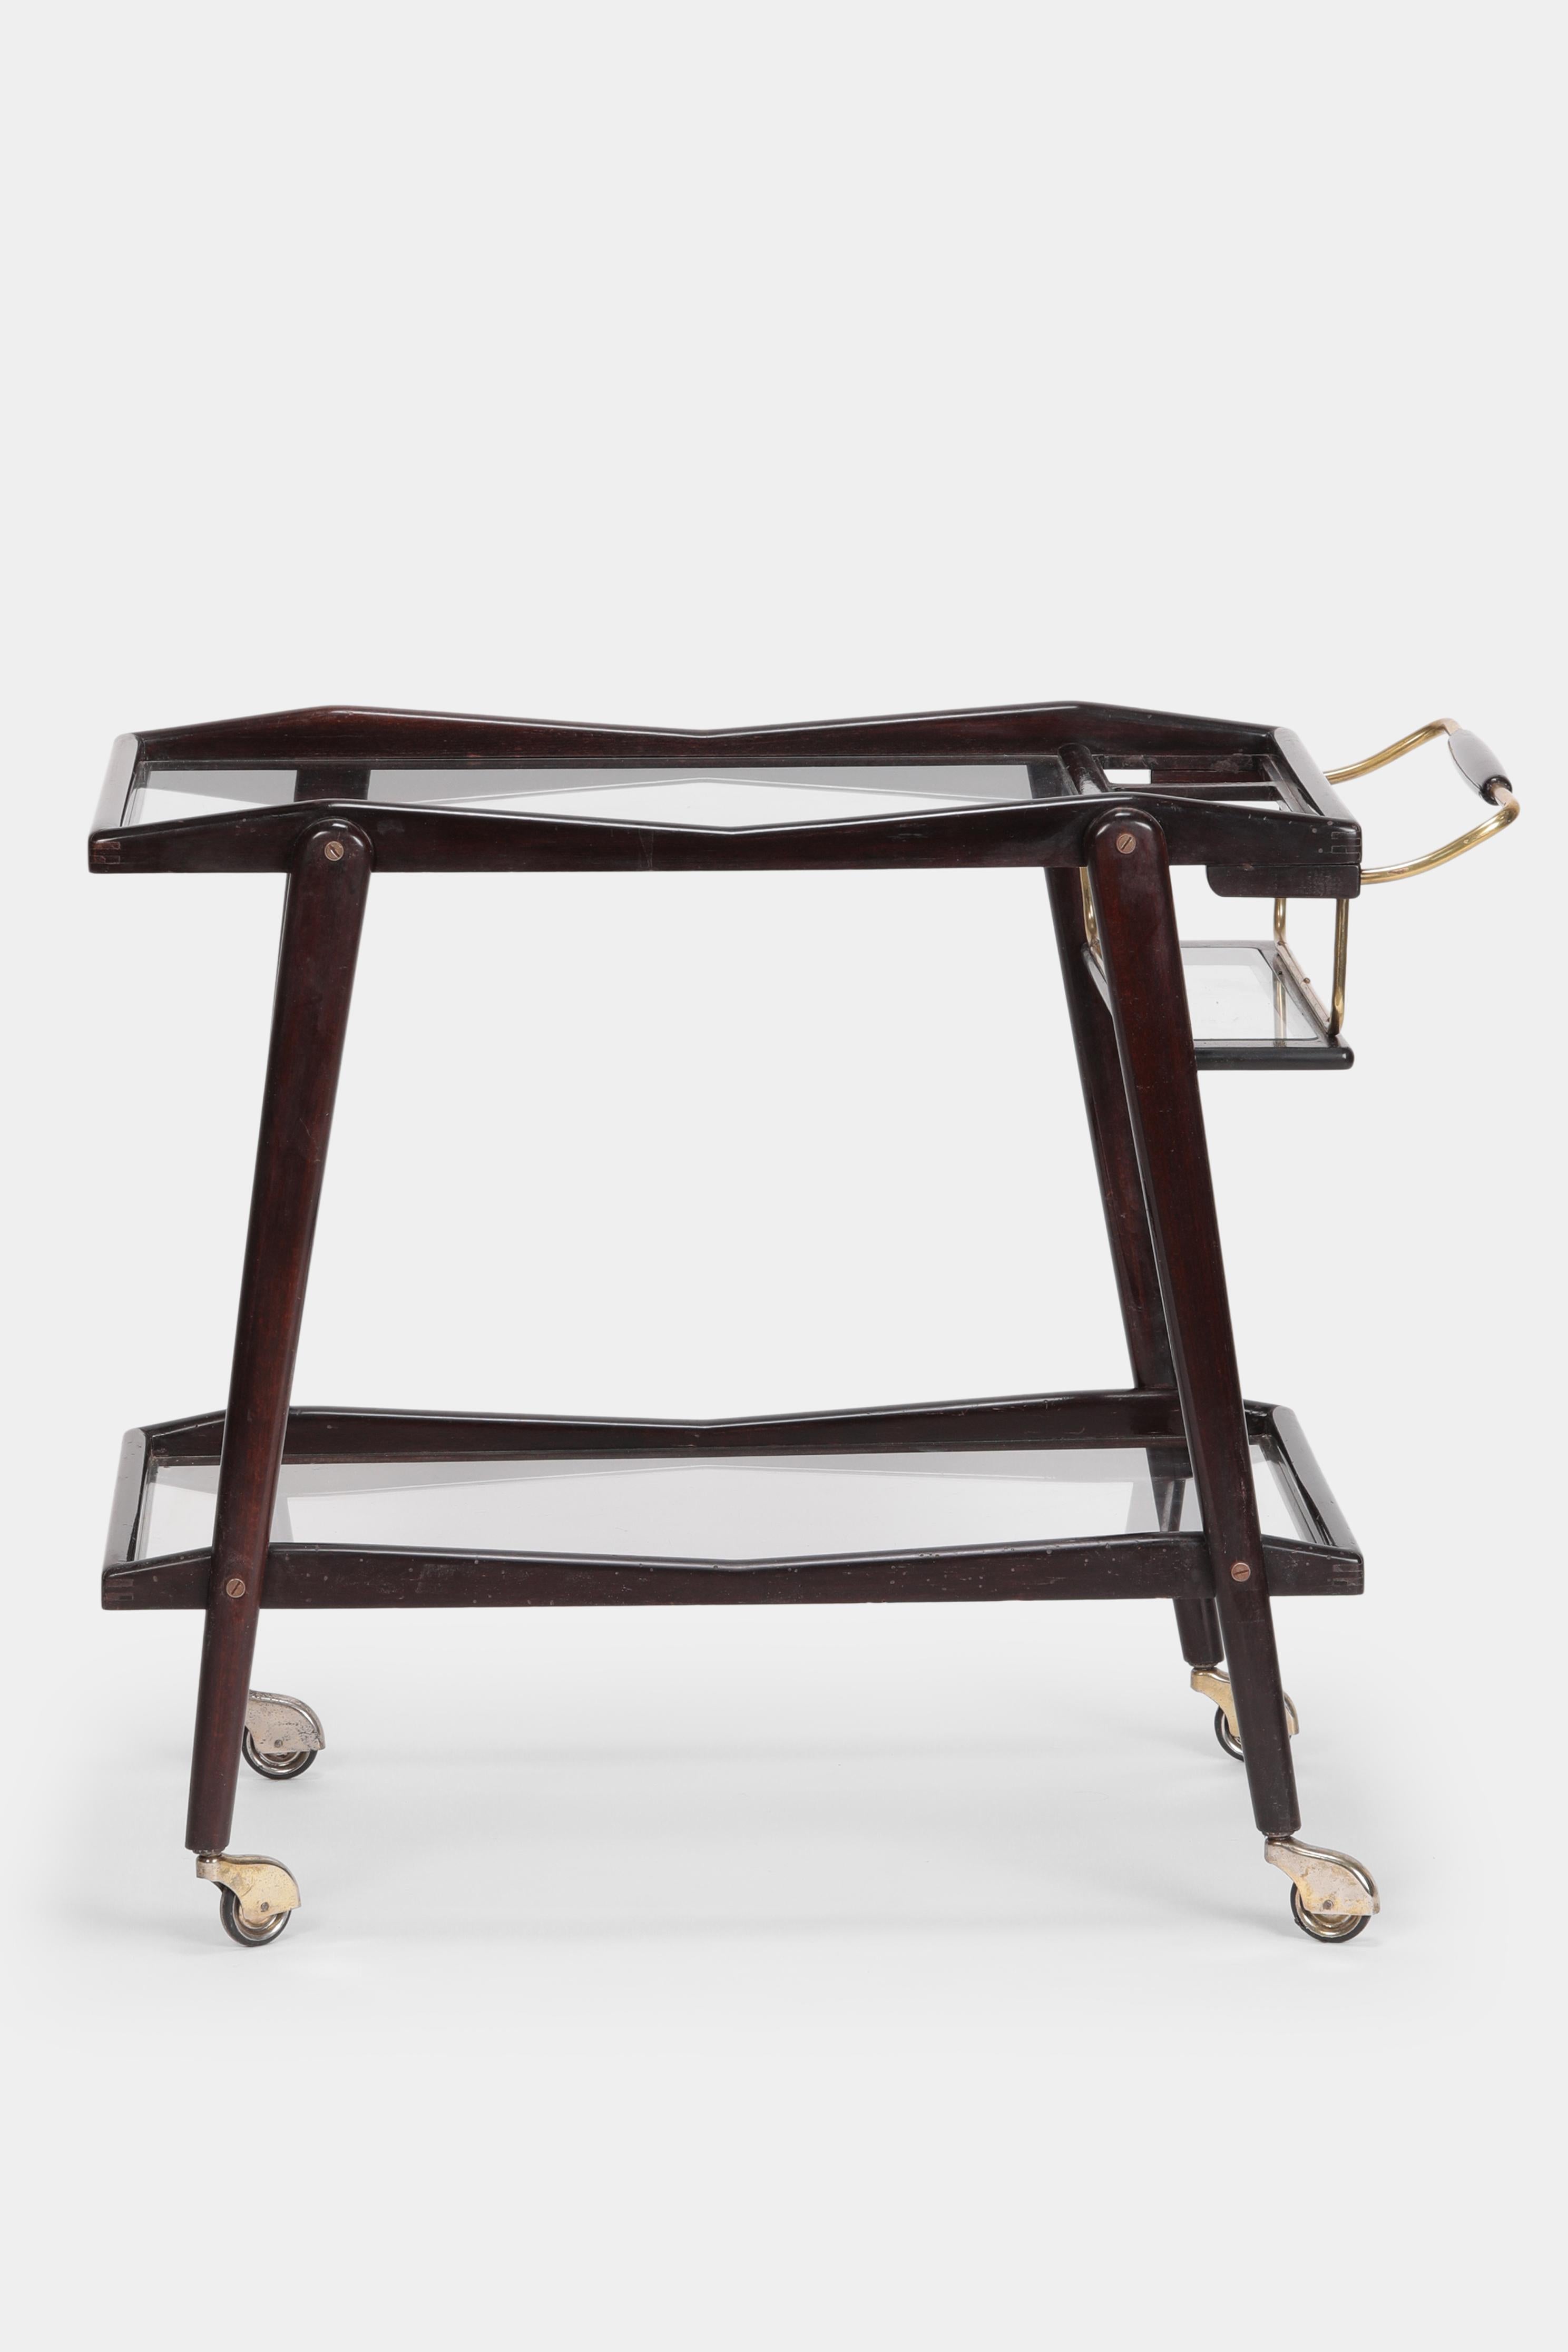 Elegant Italian serving trolley from the 1950s by Cesare Lacca with a lacquered mahogany frame and beautiful solid brass details. It has two glass shelves framed in wood. The trolley is in a beautifully restored vintage condition.